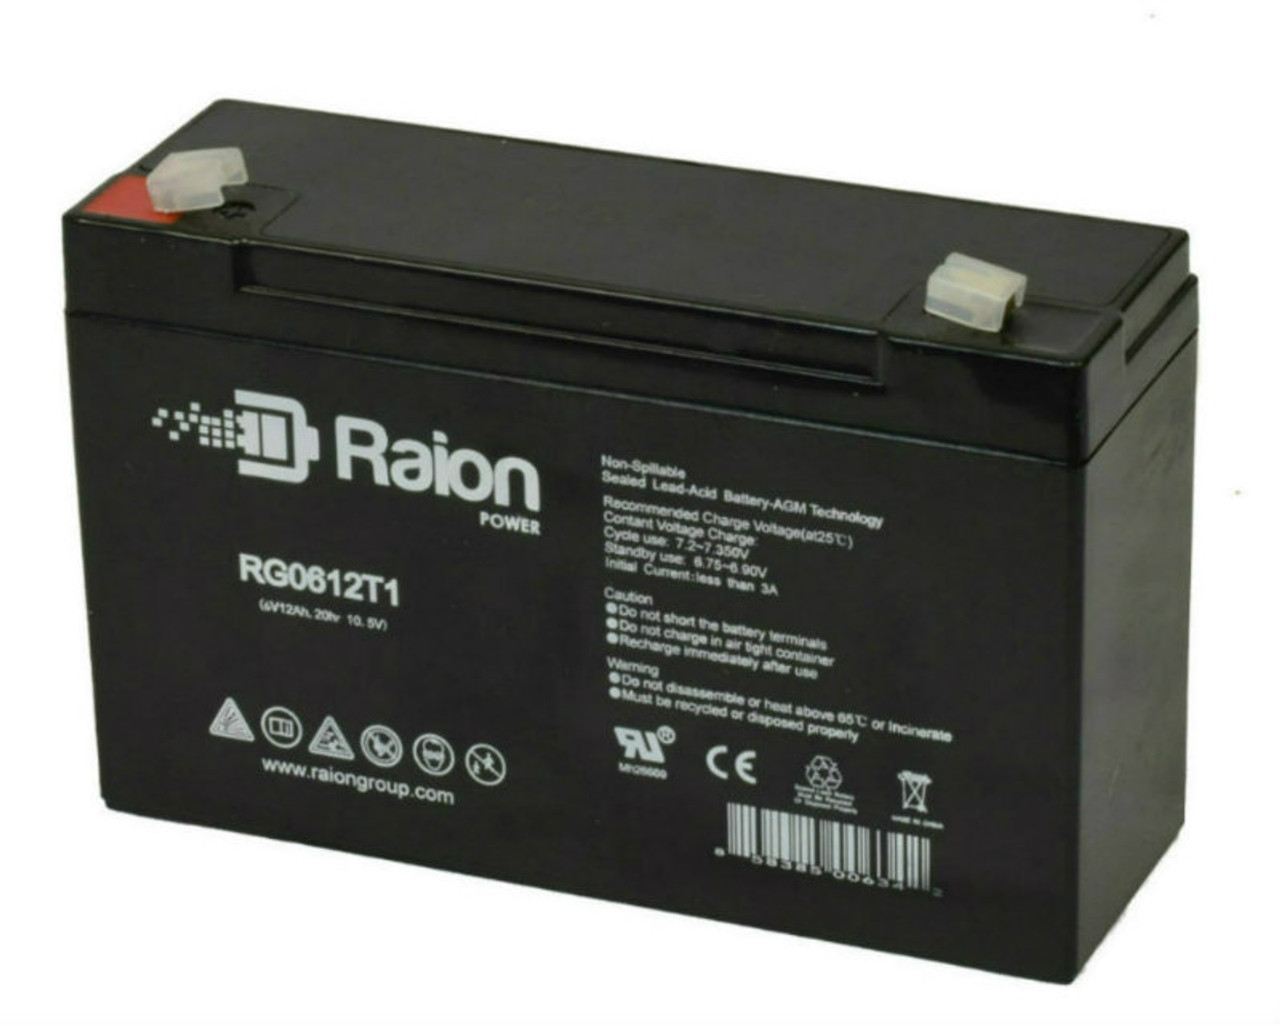 Raion Power RG06120T1 Replacement Emergency Light Battery for Trio Lighting TL930018